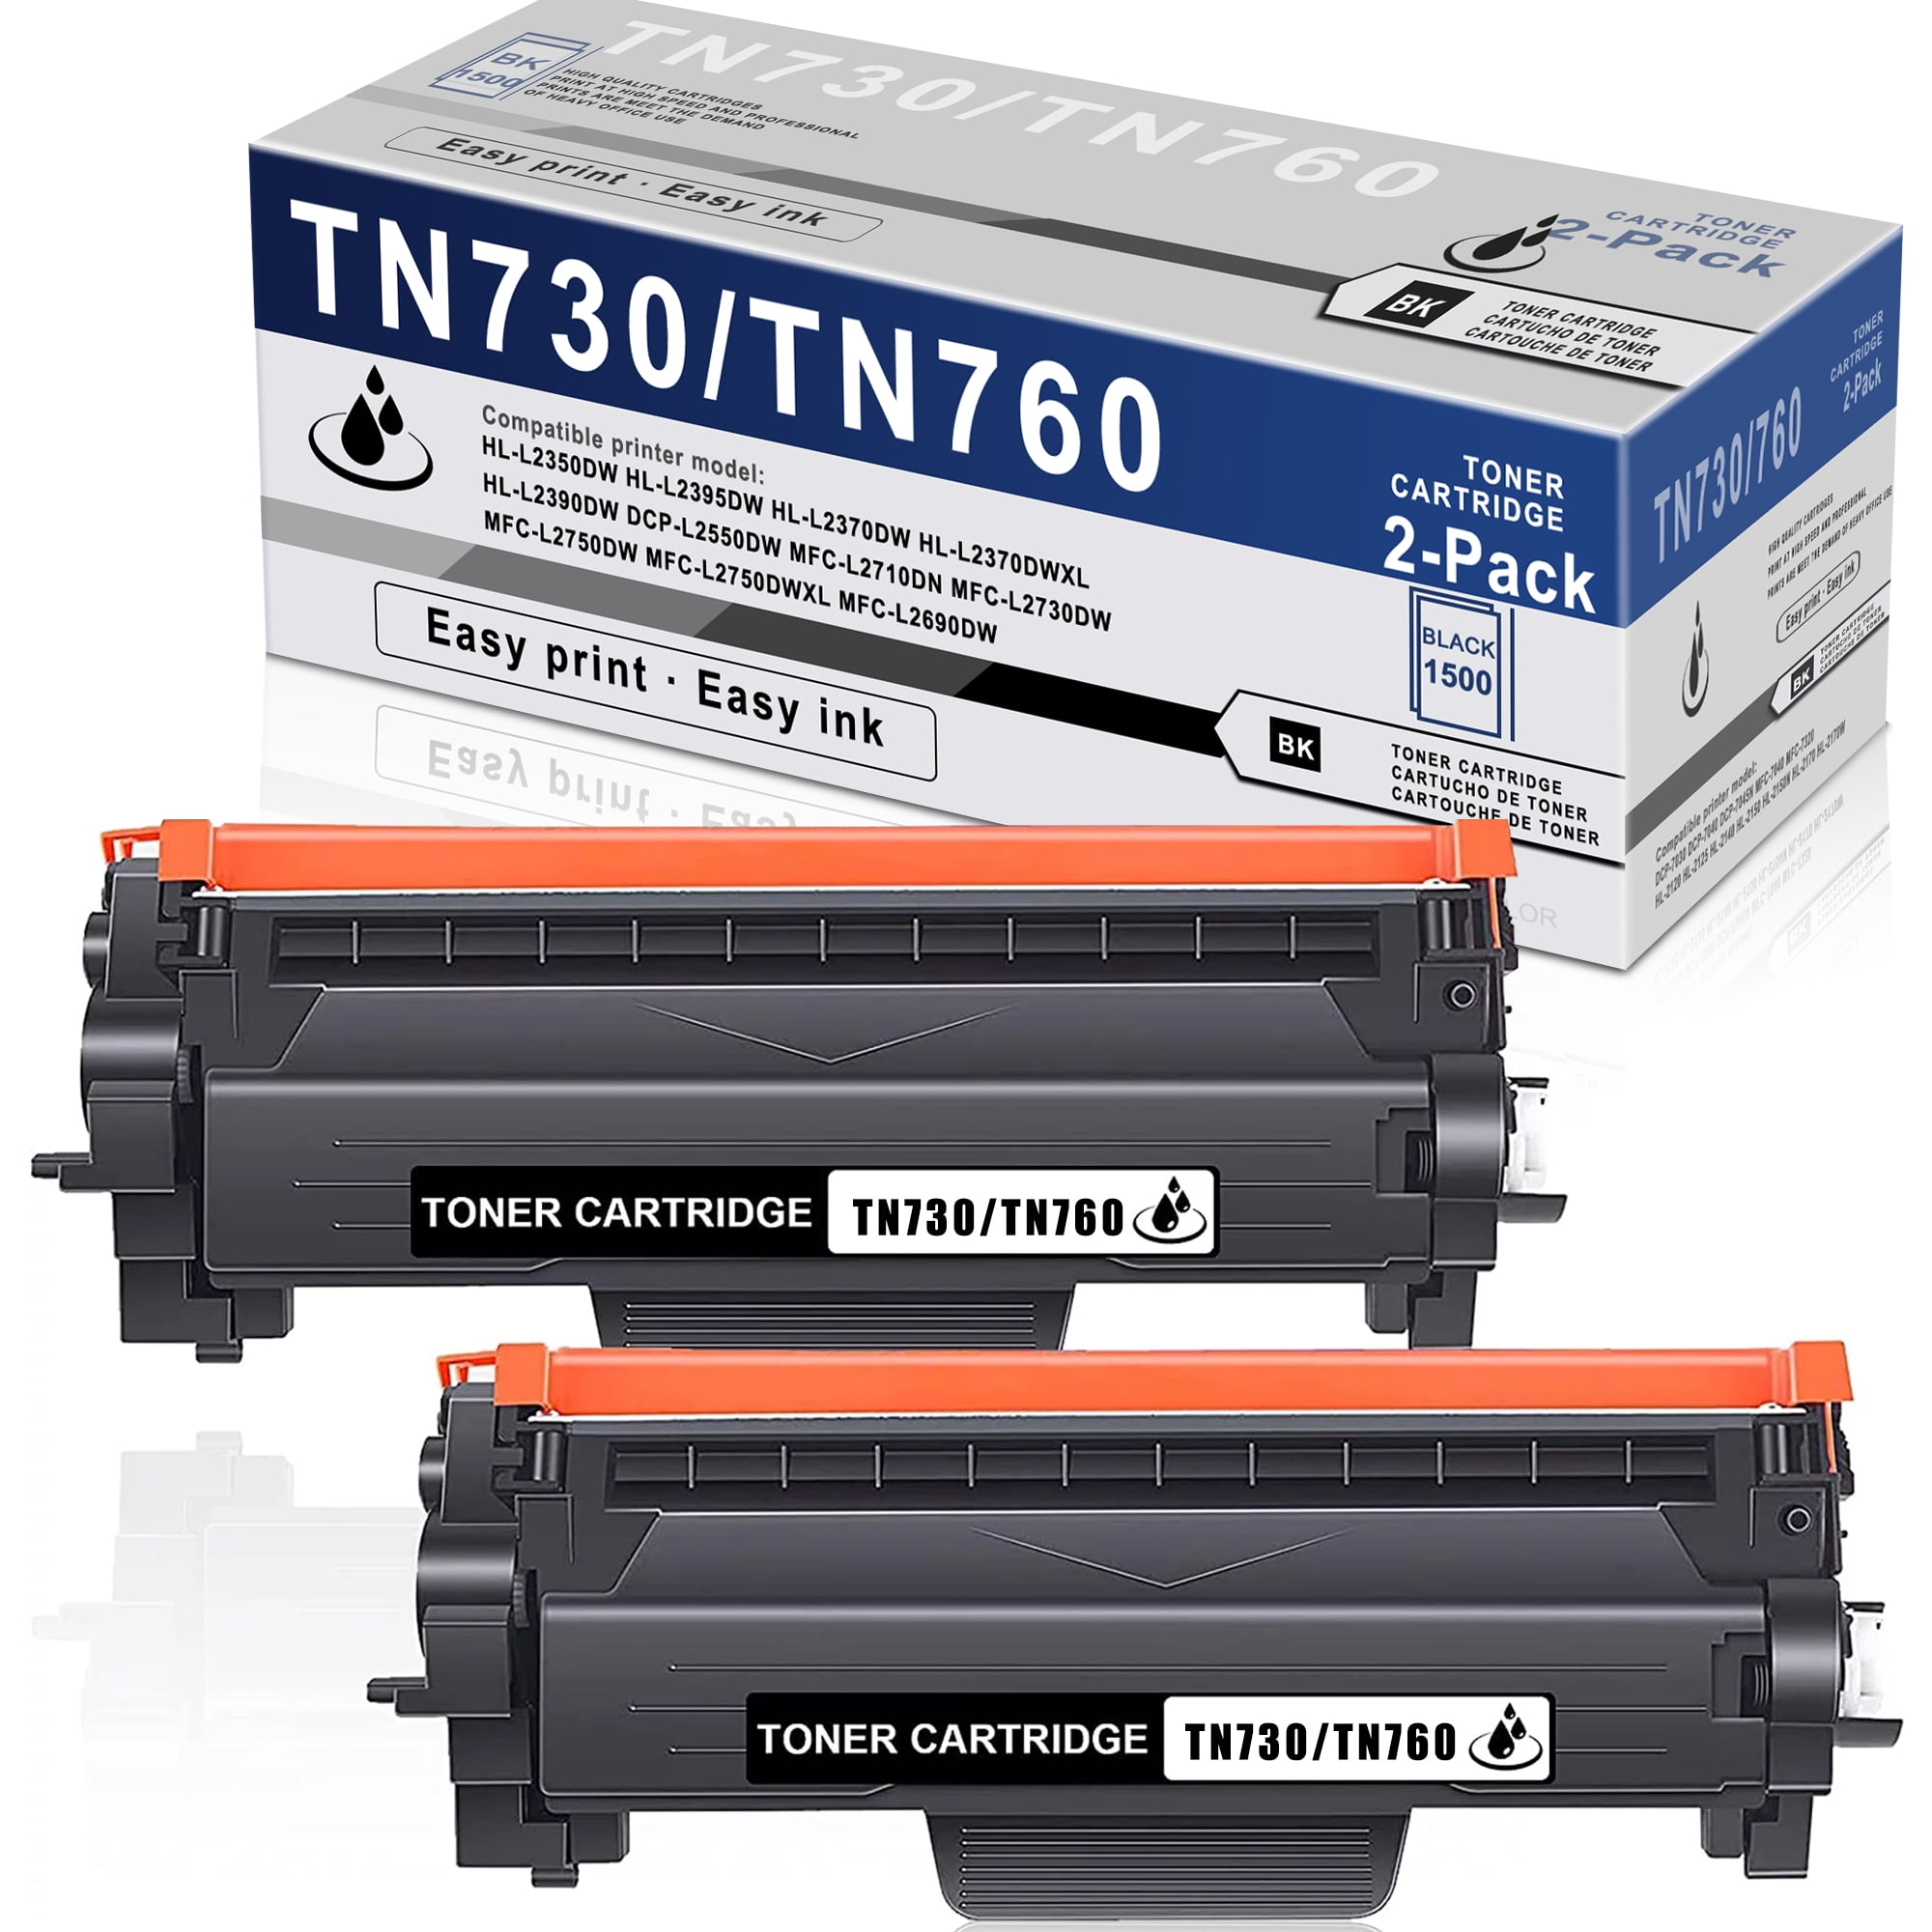 TN730/TN760 Toner: 2 Pack High Yield Black Compatible Toner Cartridge  Replacement for Brother MFC-L2710DN HL-L2395DW DCP-L2550DW HL-L2350DW